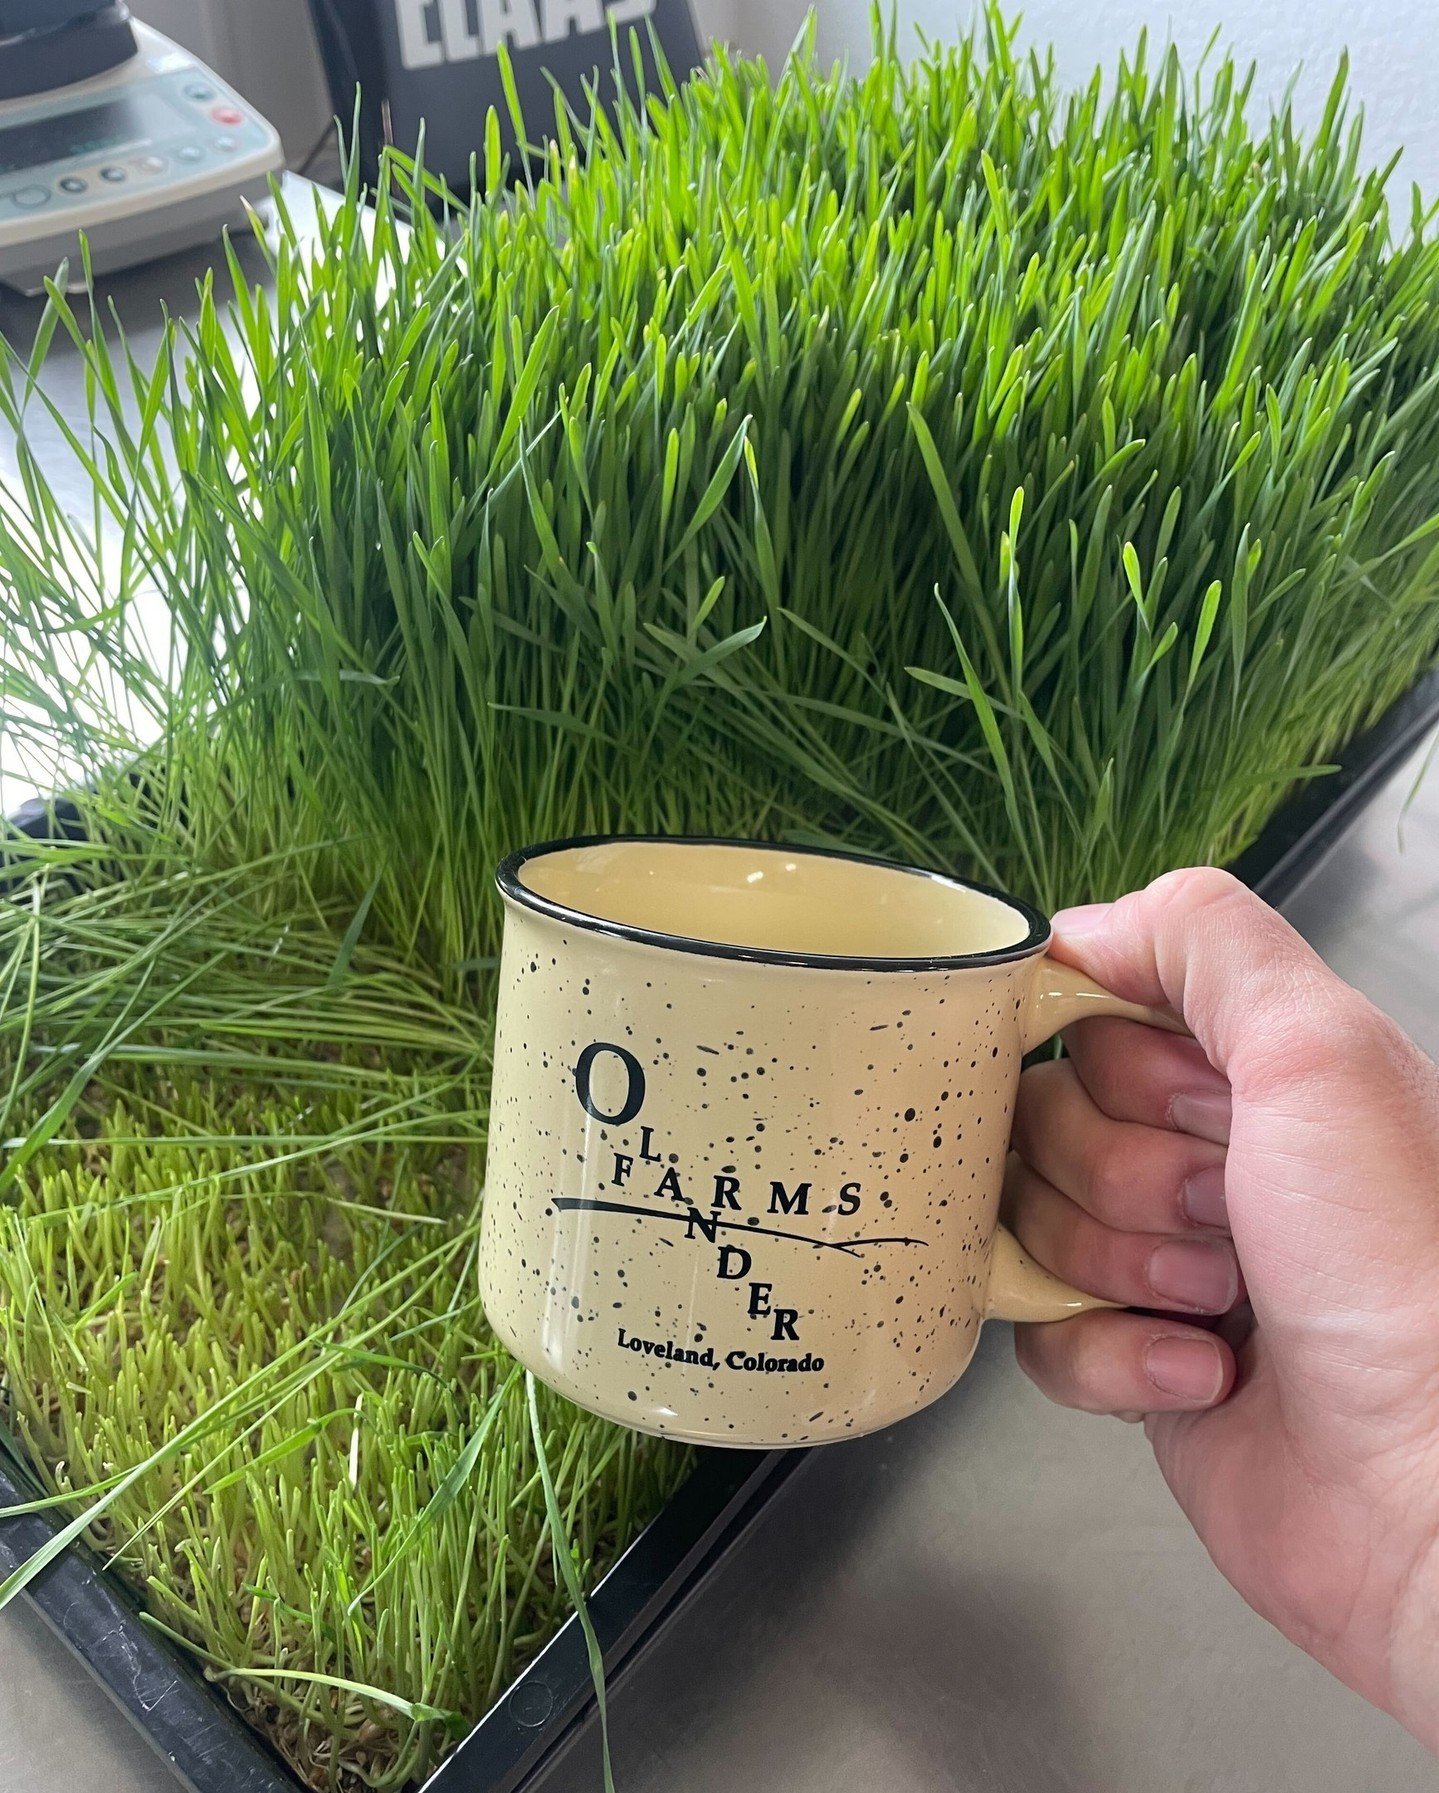 Whiskey isn&rsquo;t the only shot we like. 🥃
Some Oland Wheat shots kickstart the day!

Step ☝️: Order Oland Wheat berries
Step ✌️: Sprout Oland Wheat berries
Step 👌: Juice that delicious Oland Wheat grass into a green goodness
Step ✋️: You'll be g